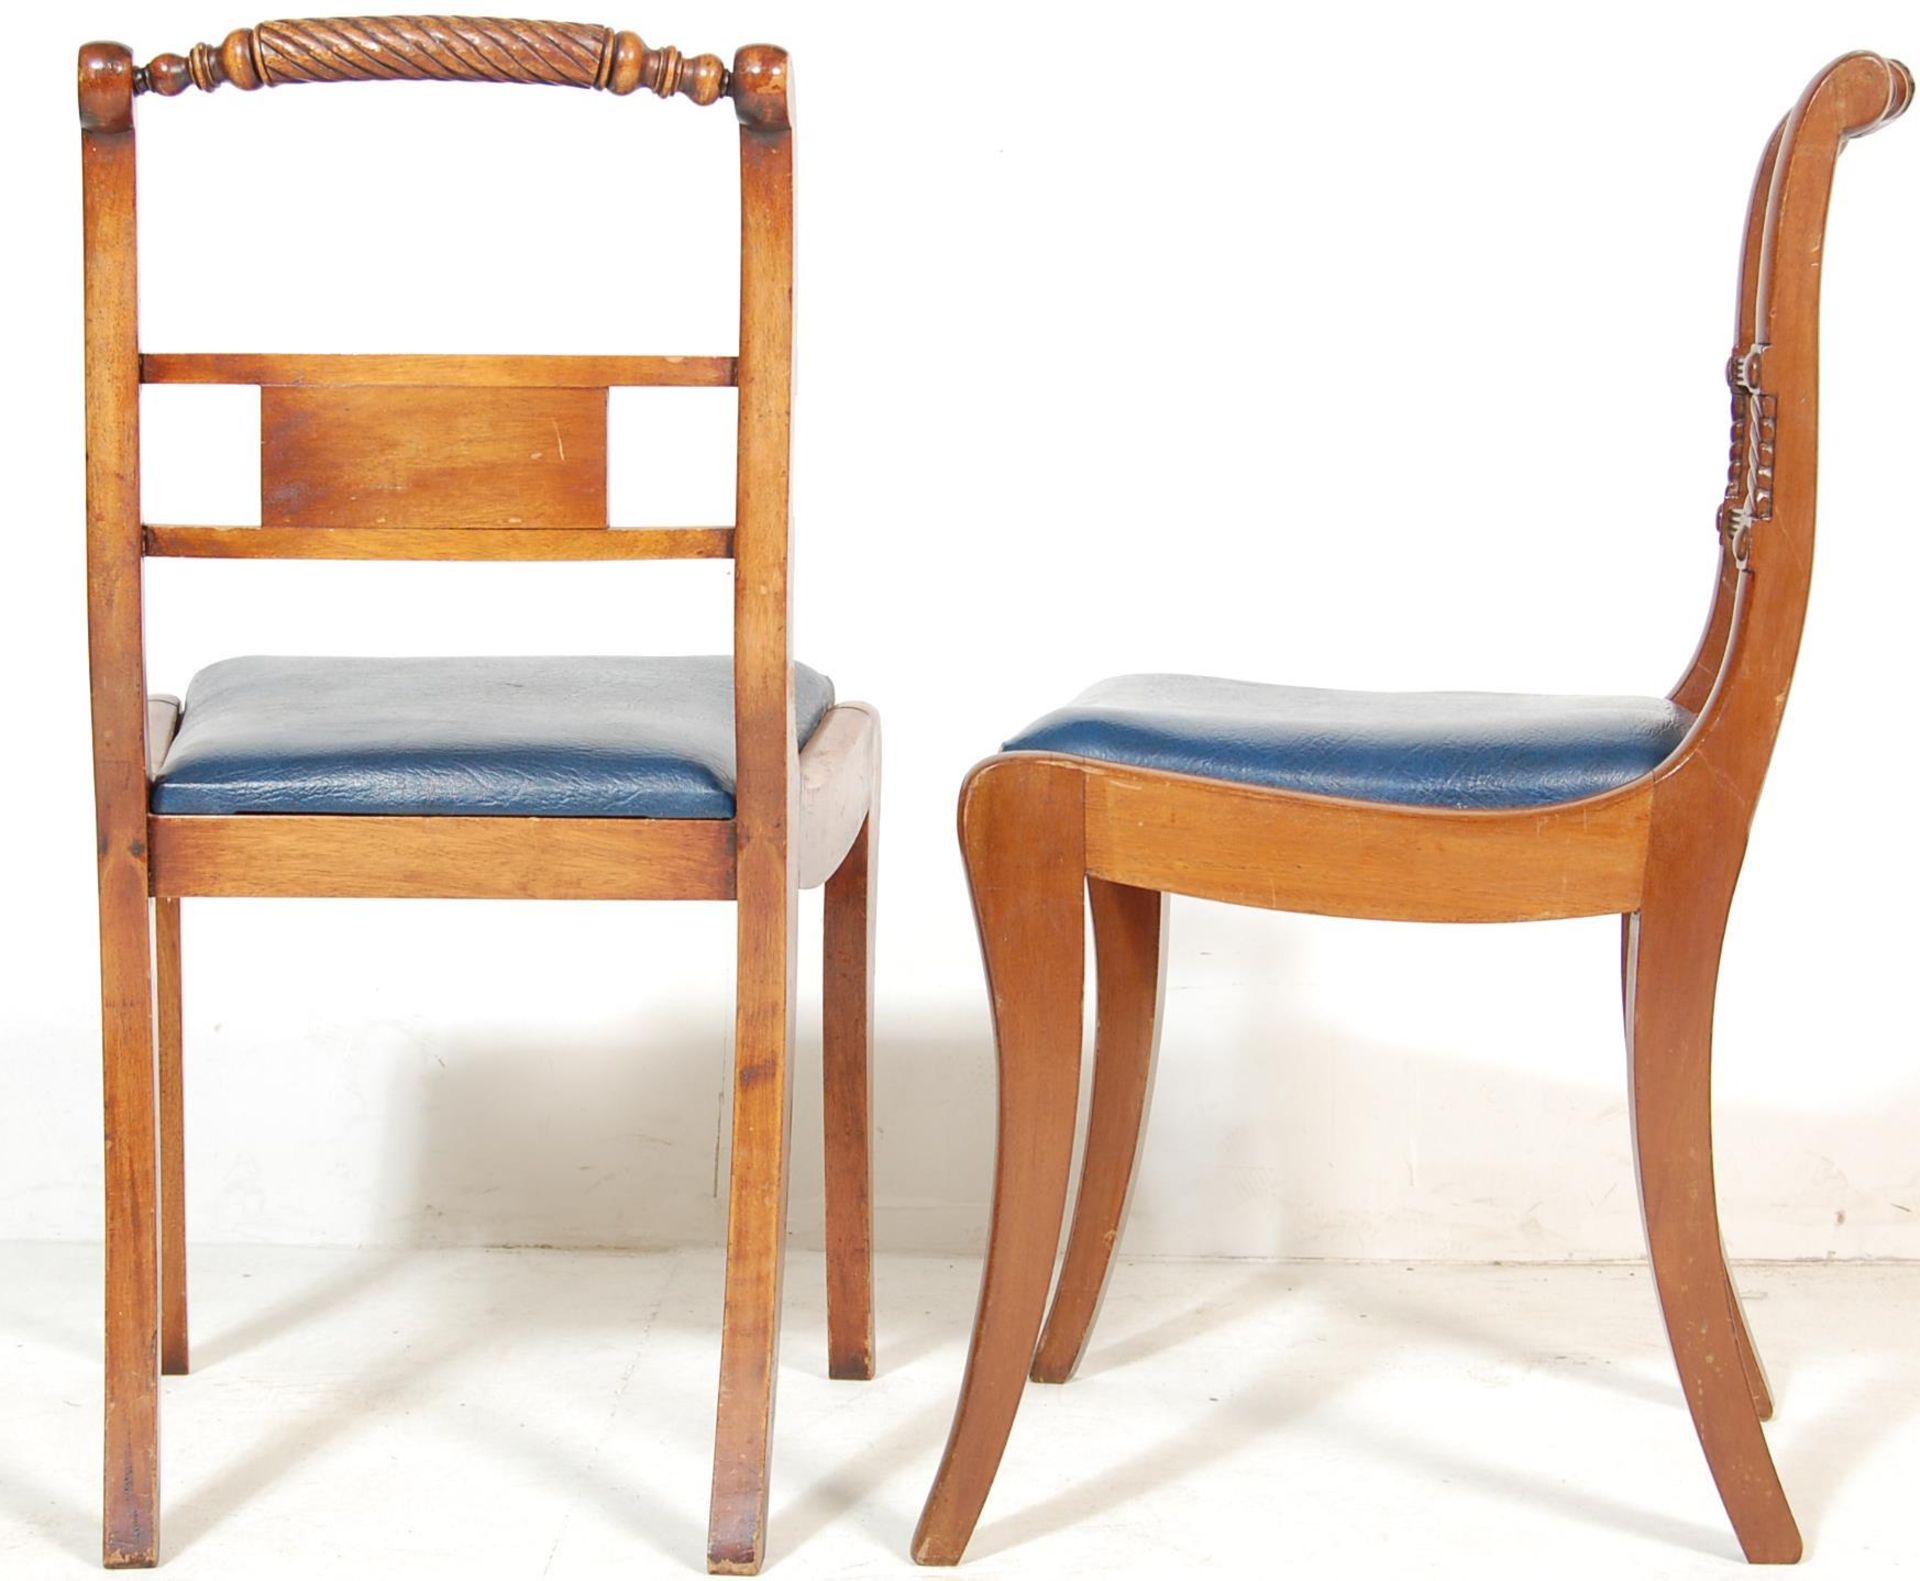 TEN EARLY 20TH CENTURY EDWARDIAN MAHOGANY DINING CHAIRS - Image 5 of 5